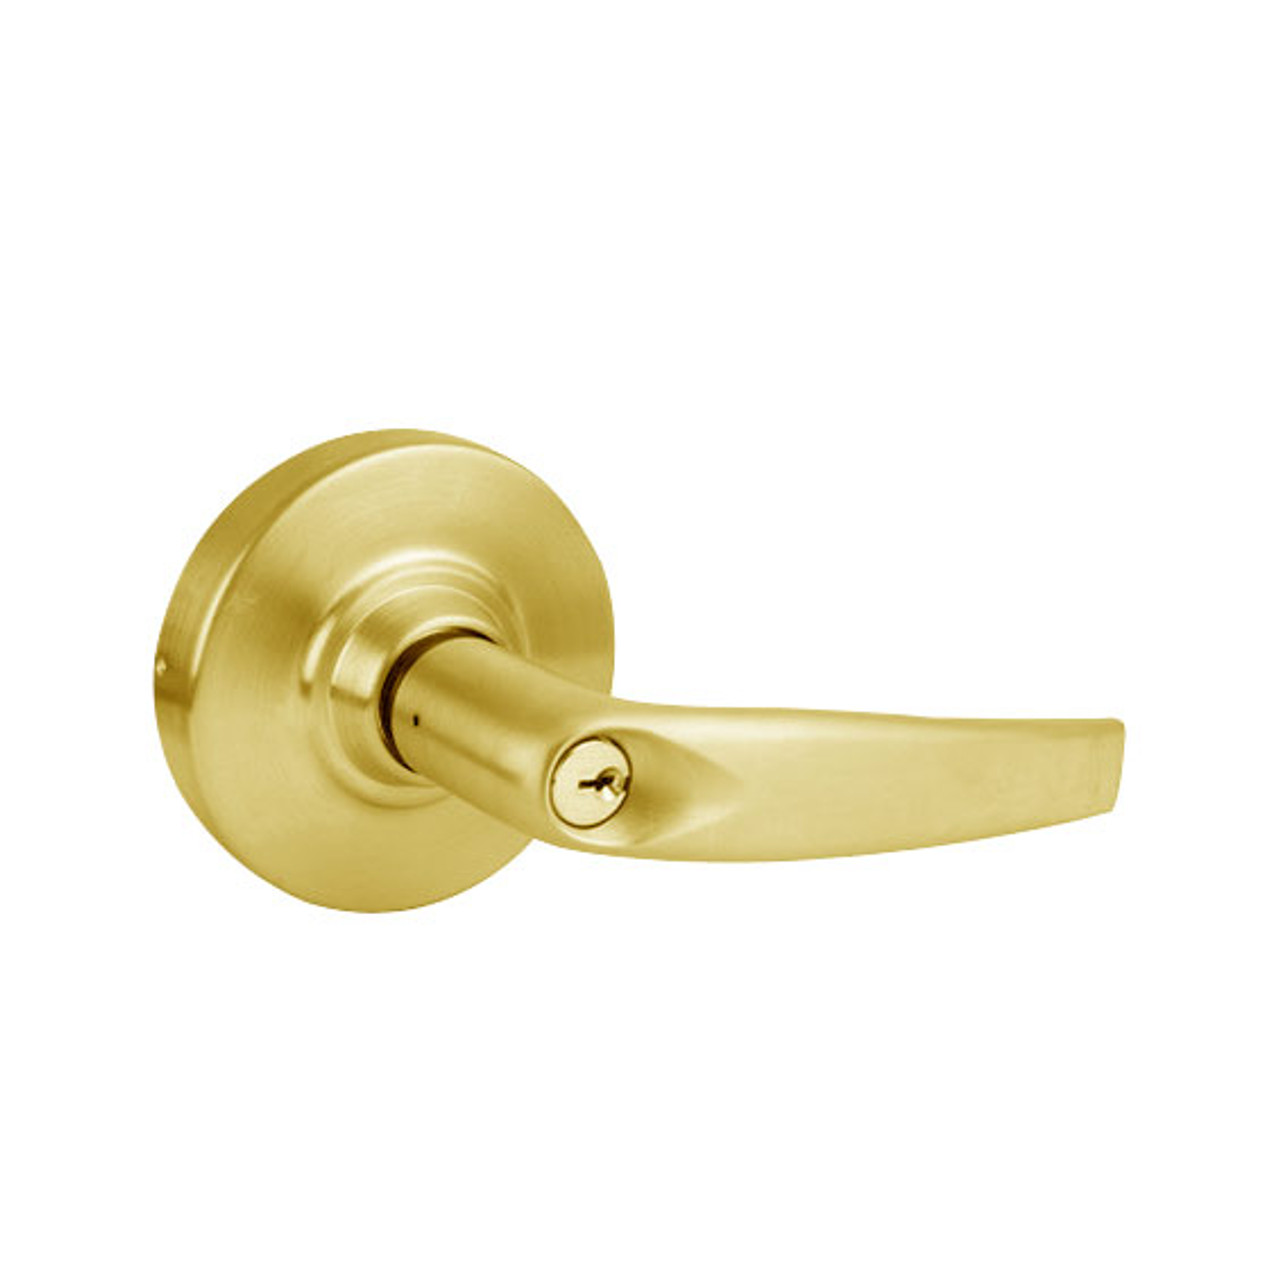 ND82PD-ATH-605 Schlage Athens Cylindrical Lock in Bright Brass